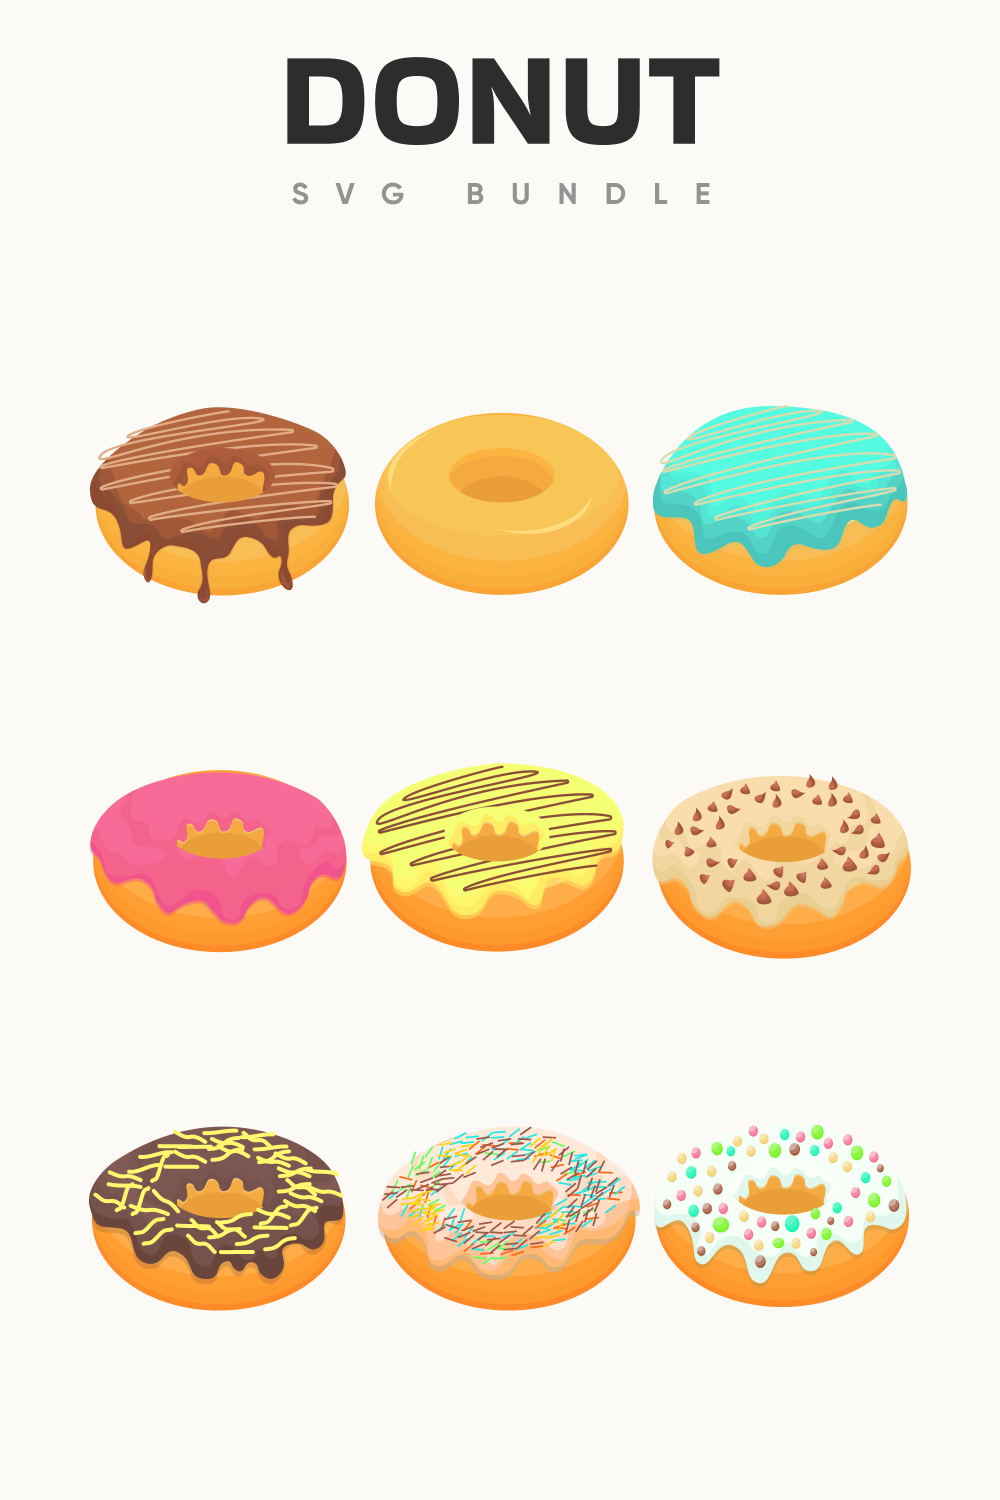 So tasty donuts in different colors.